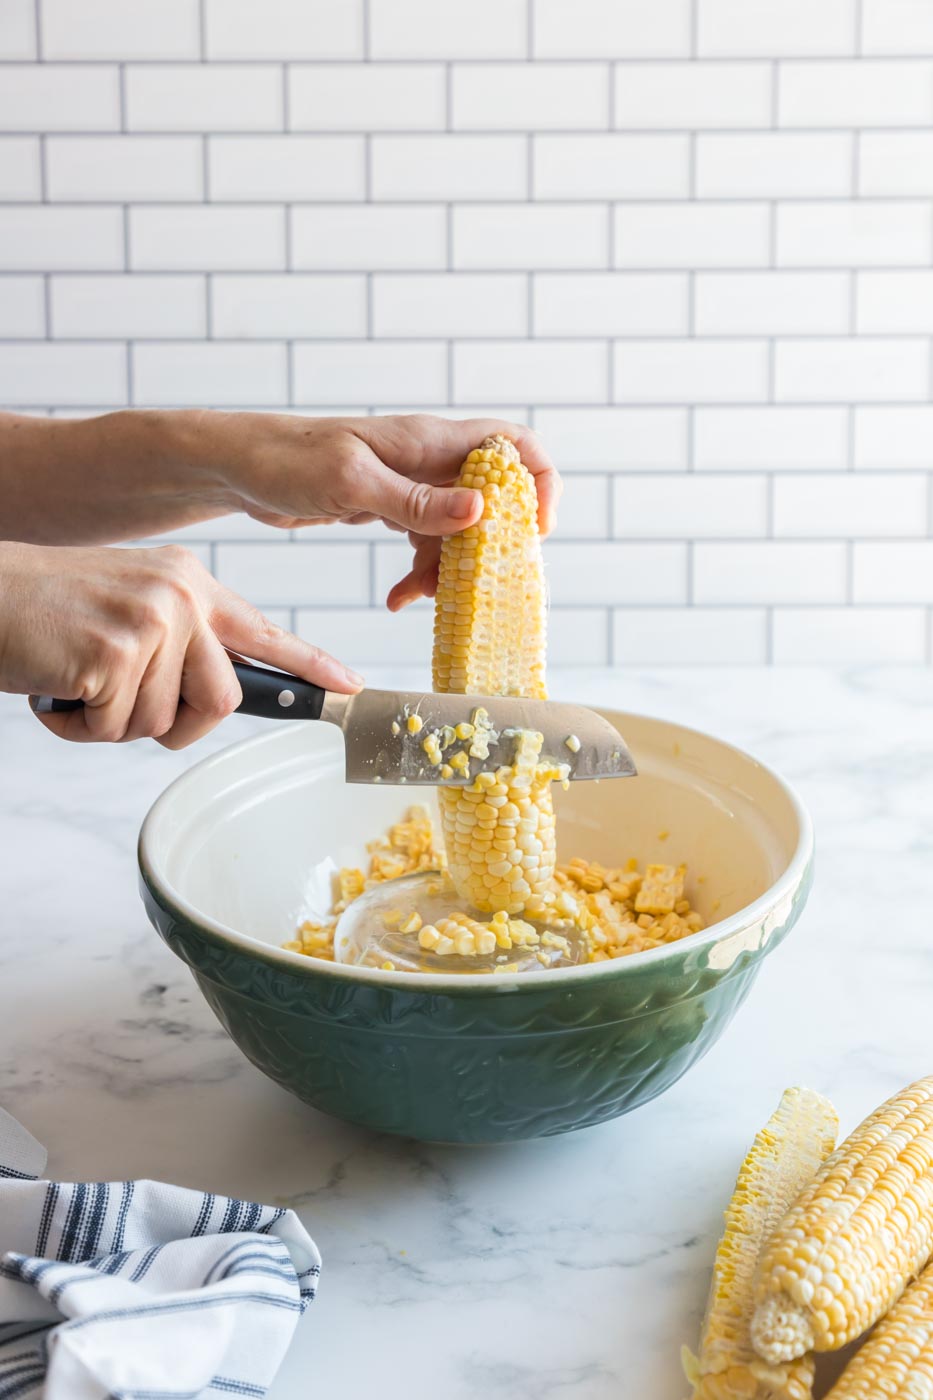 using knife to scrape kernels of corn cob into a bowl